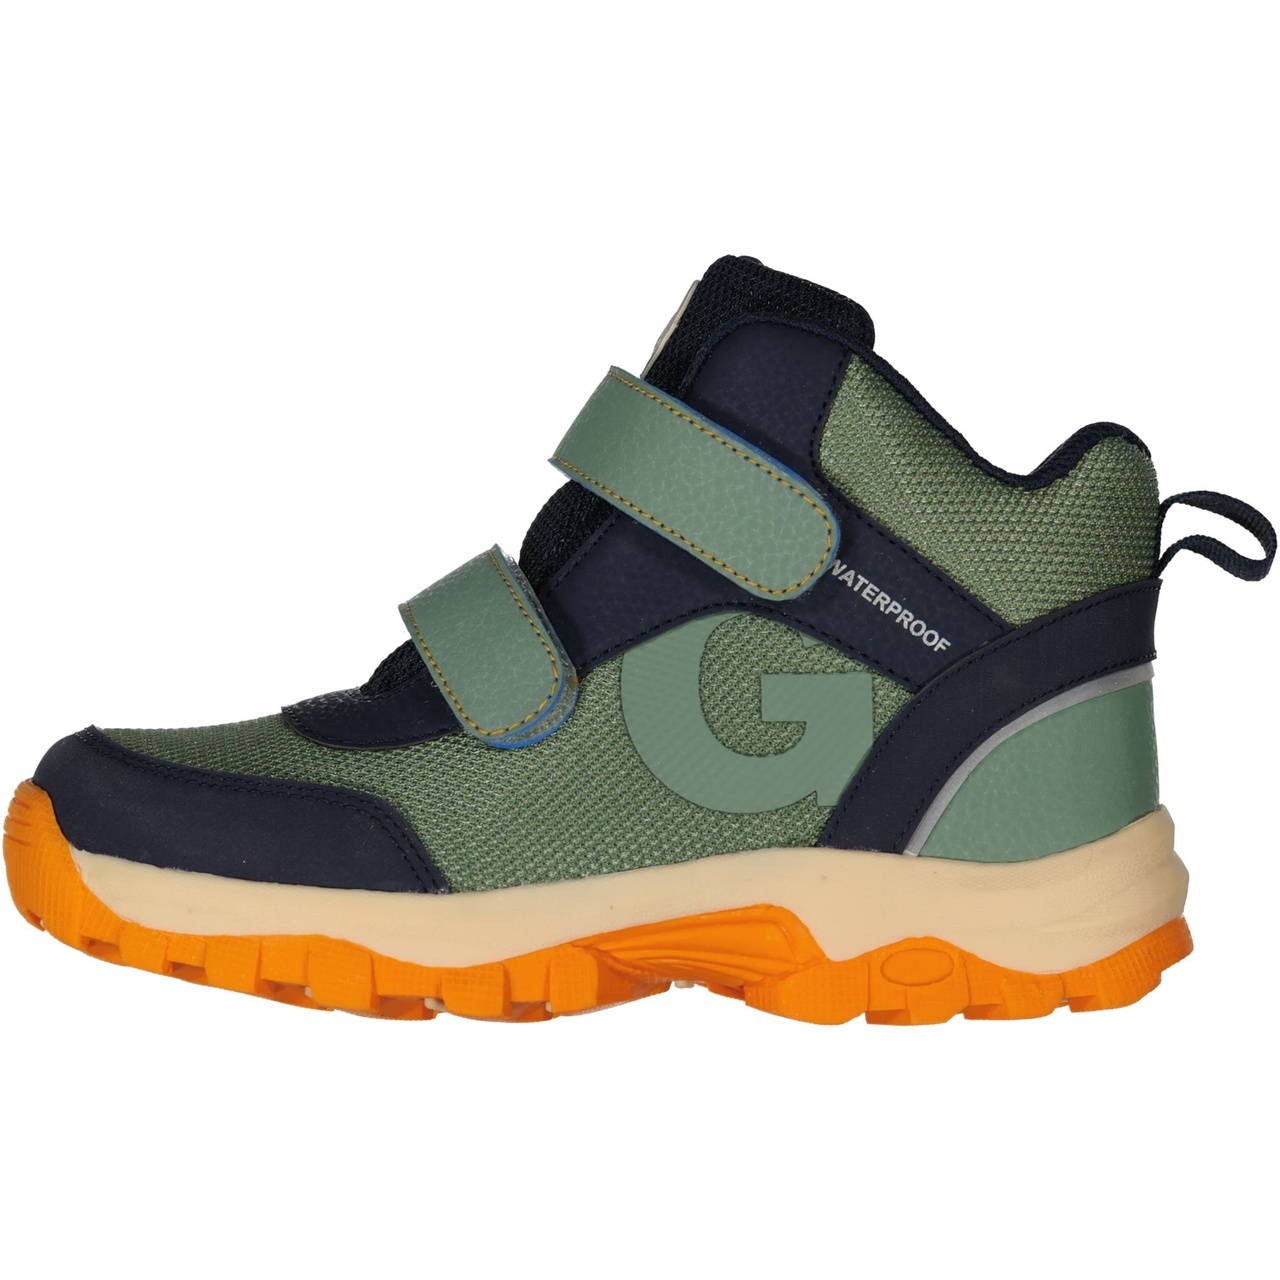 All weather shoes Moss green  34 (22,4 cm)